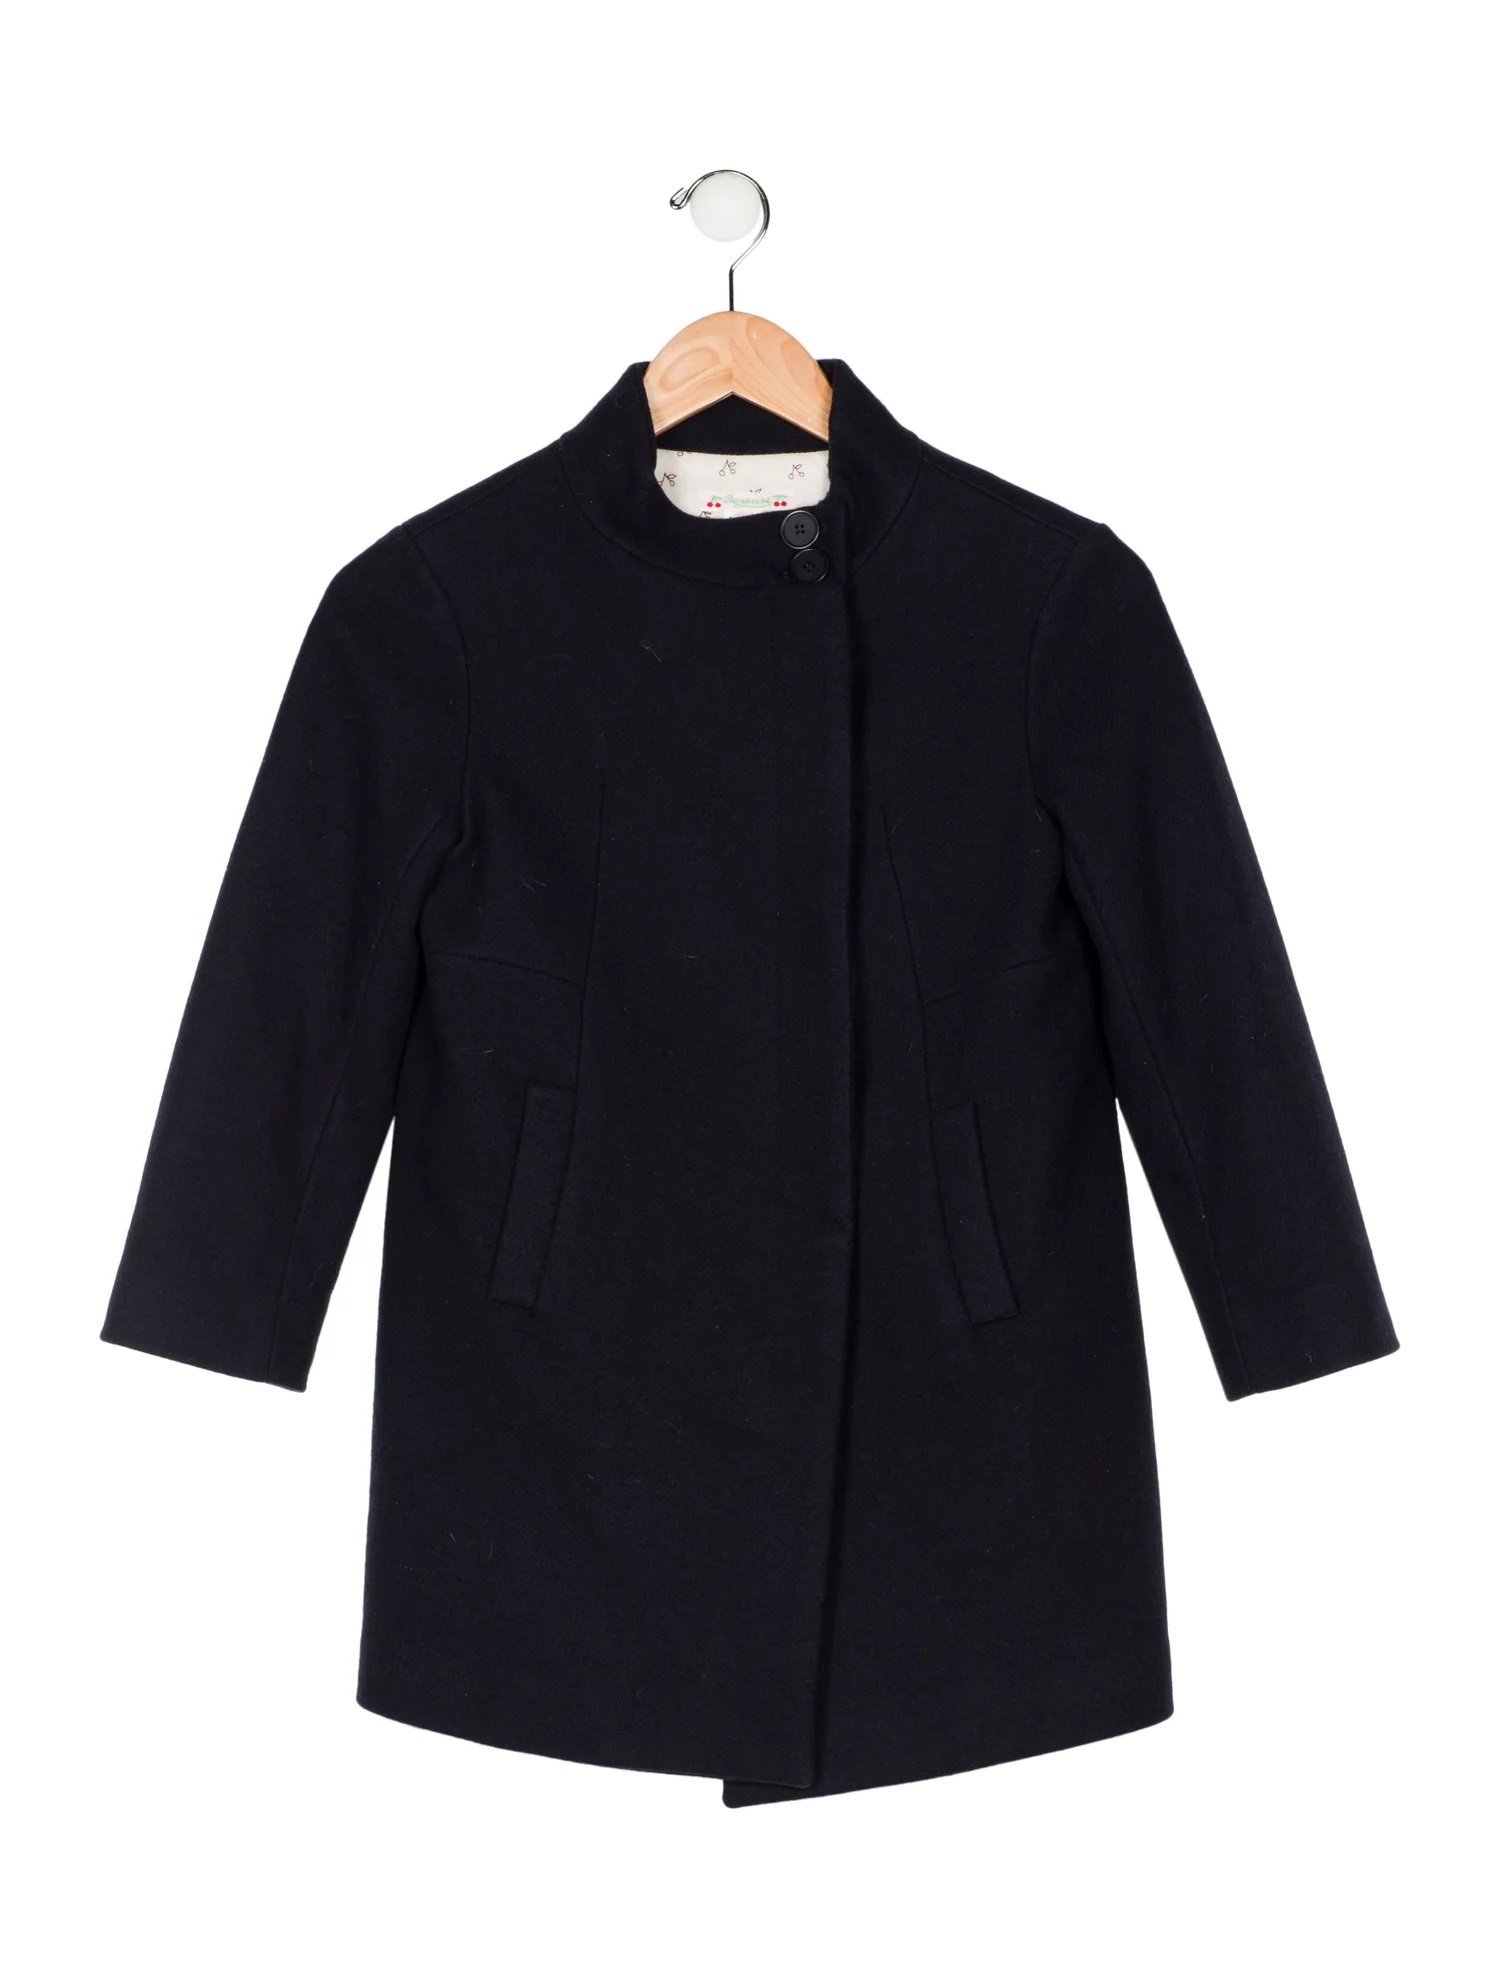 Bonpoint Wool Coat with Stand Collar.jpg